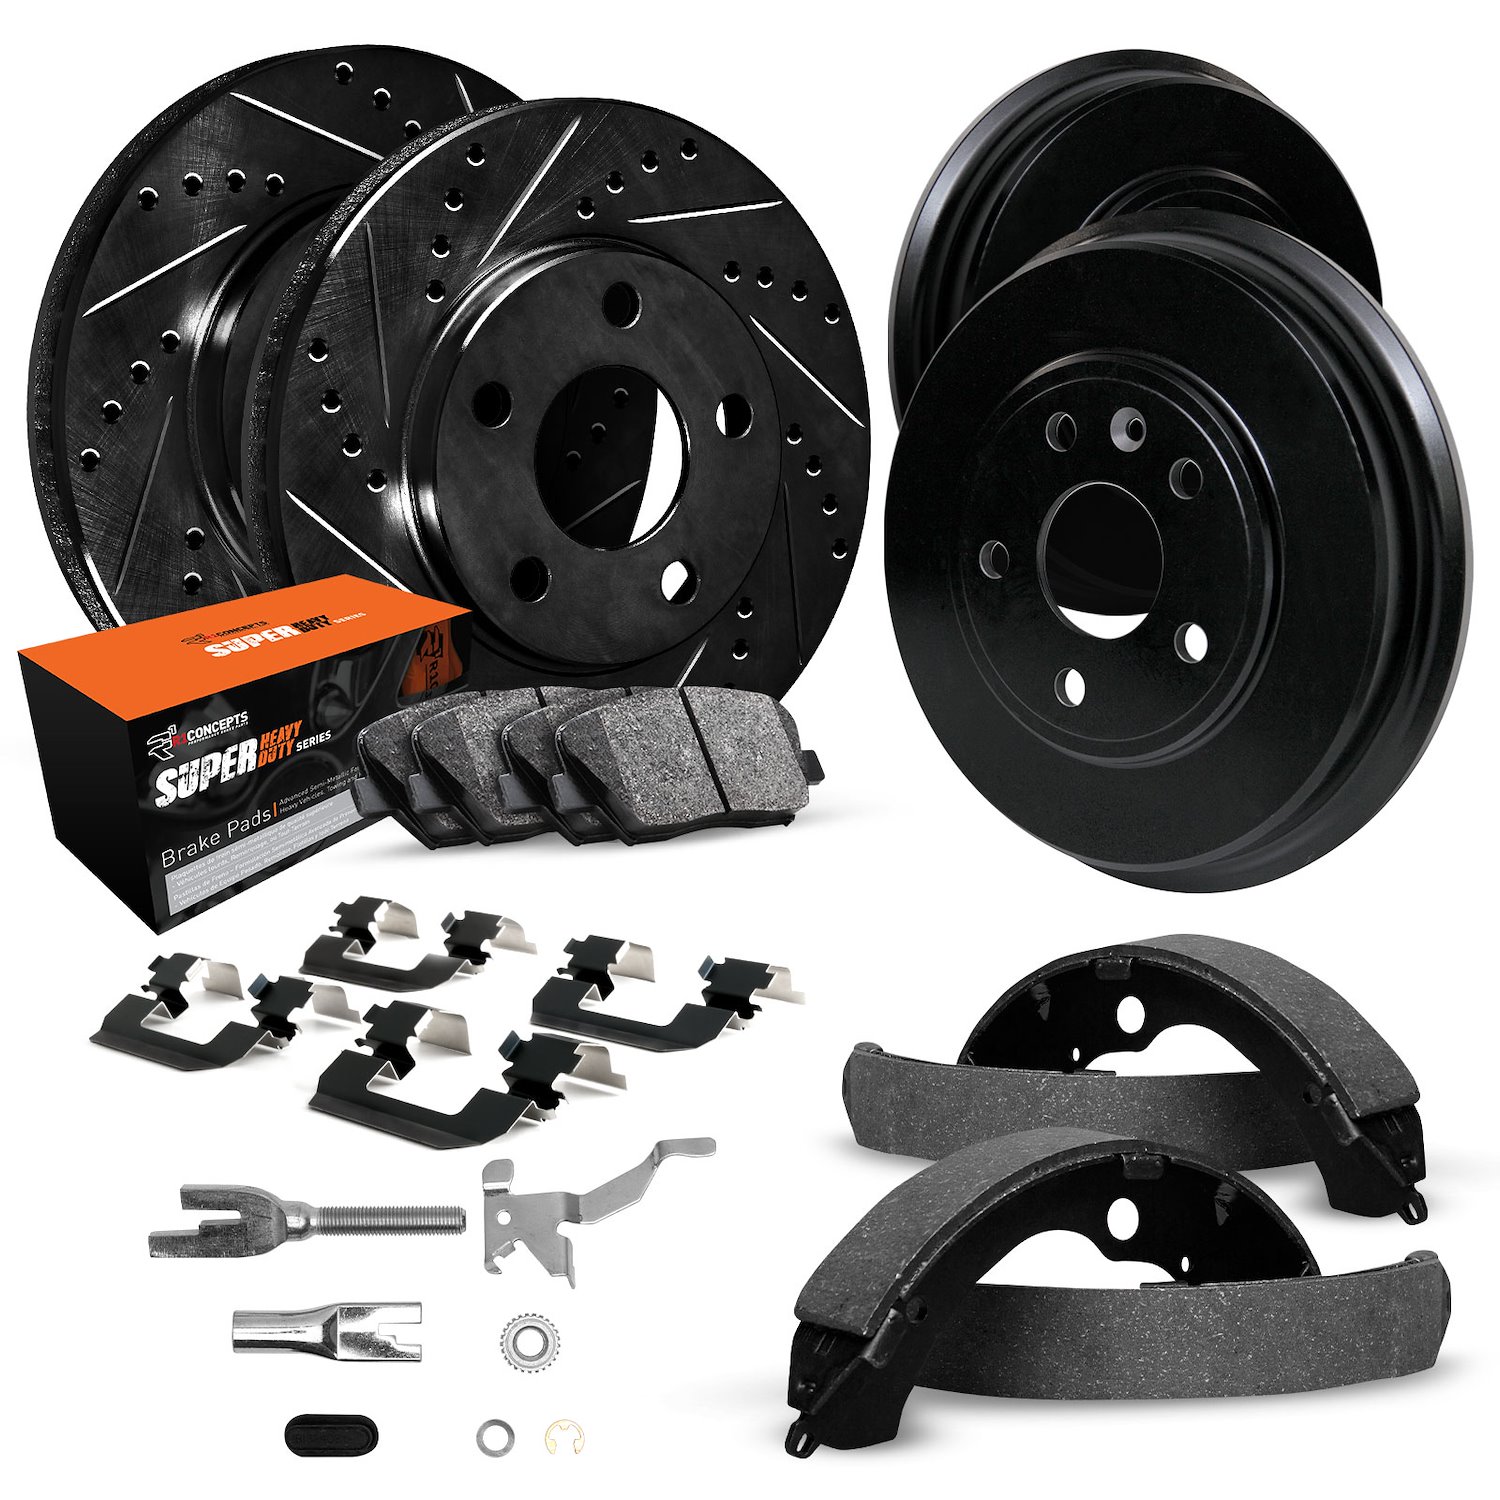 E-Line Drilled/Slotted Black Rotor & Drum Set w/Super-Duty Pads, Shoes, Hardware/Adjusters, 1992-2000 GM